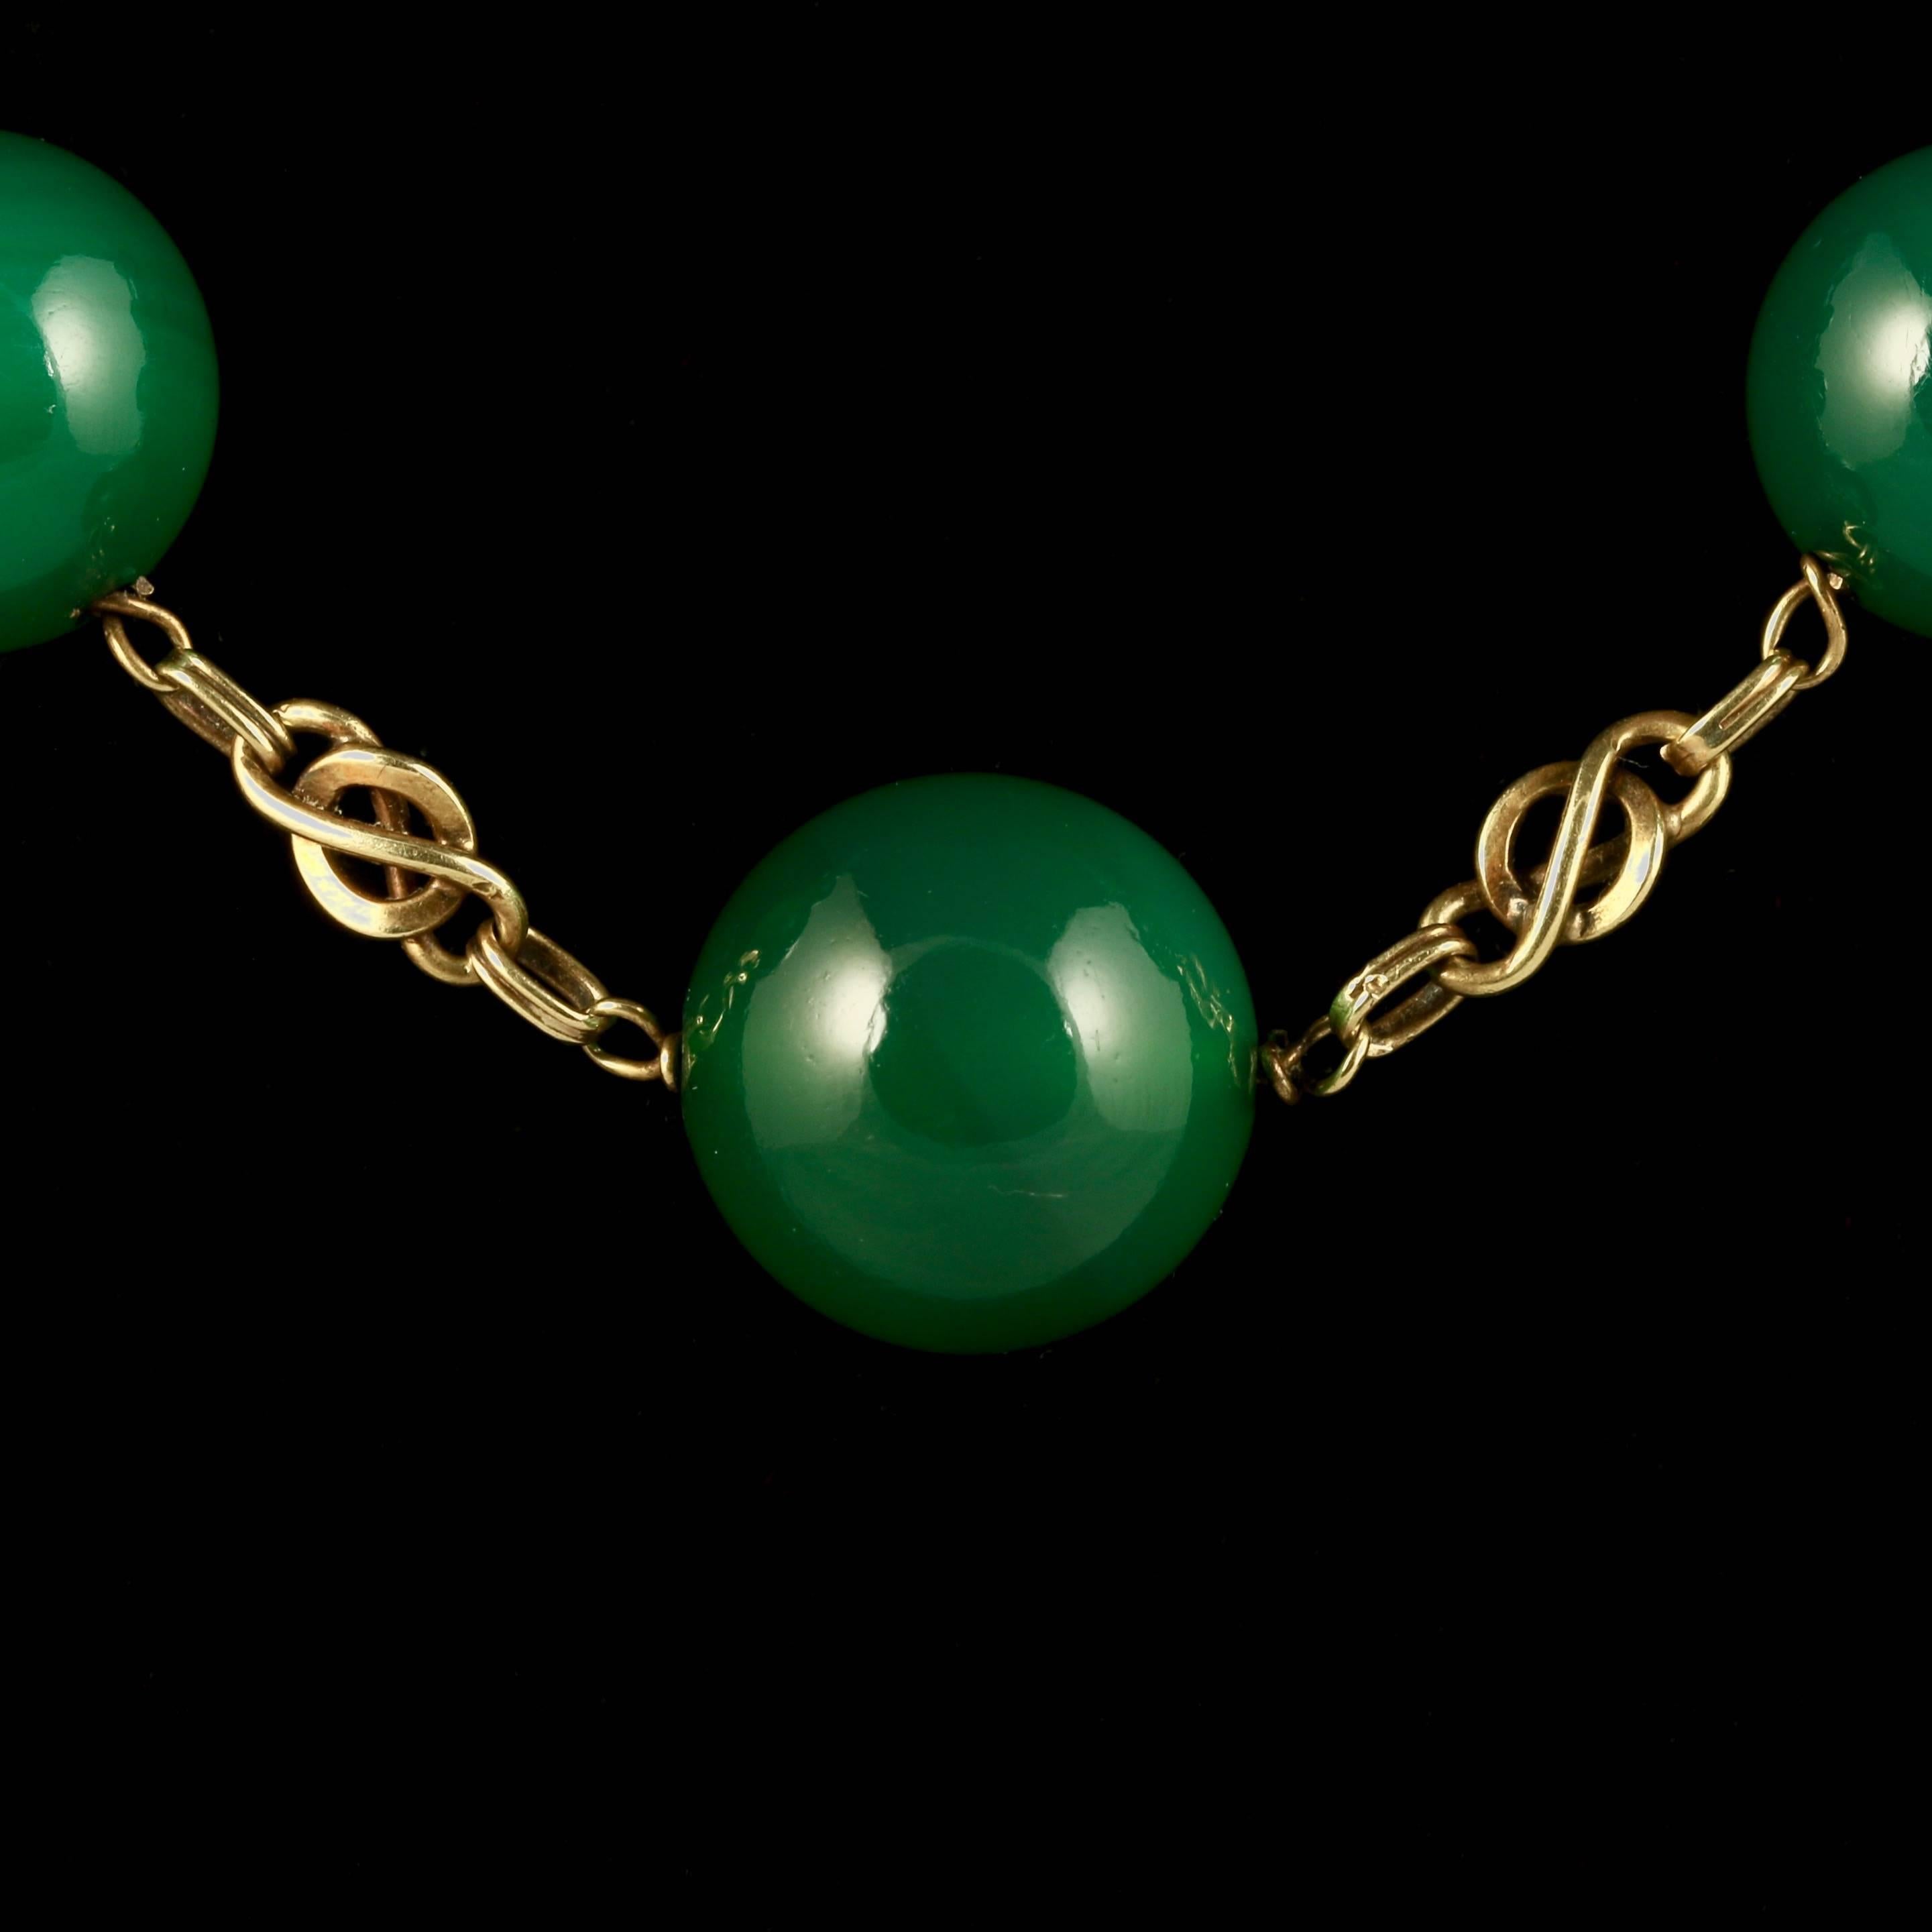 This genuine Victorian French 18ct yellow gold necklace is Circa 1880.

Stamped with French hallmarks on the fancy gold chain, beautiful all round French workmanship.

Typically French in its design and workmanship

Thirteen natural green quartz